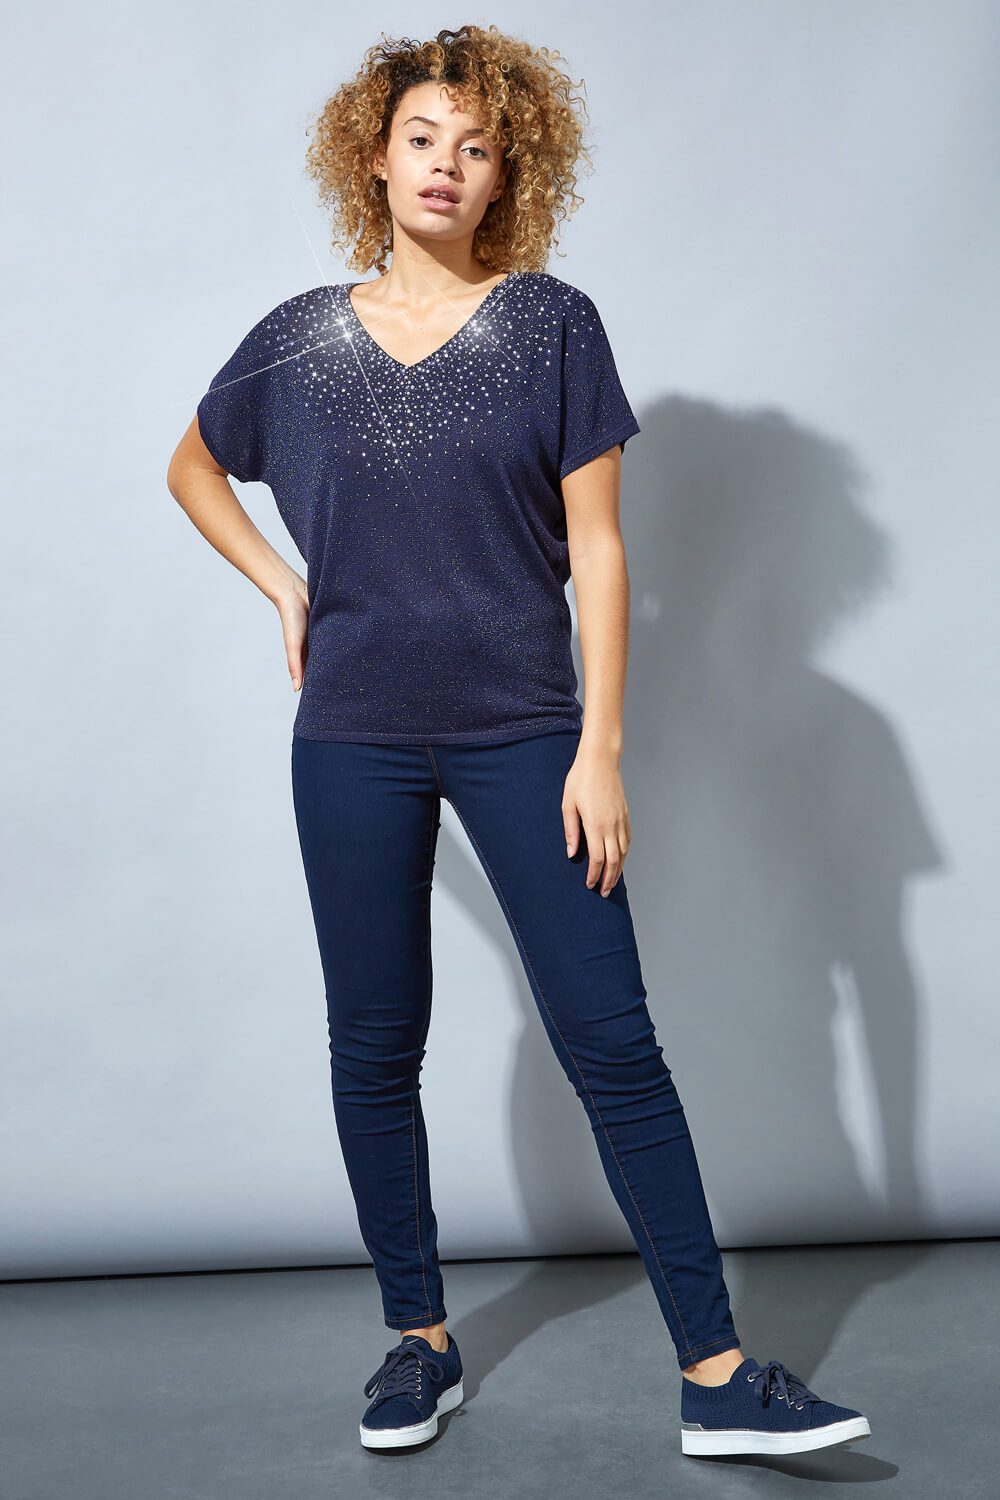 Midnight-Blue Scatter Hotfix Knitted T-Shirt, Image 2 of 4